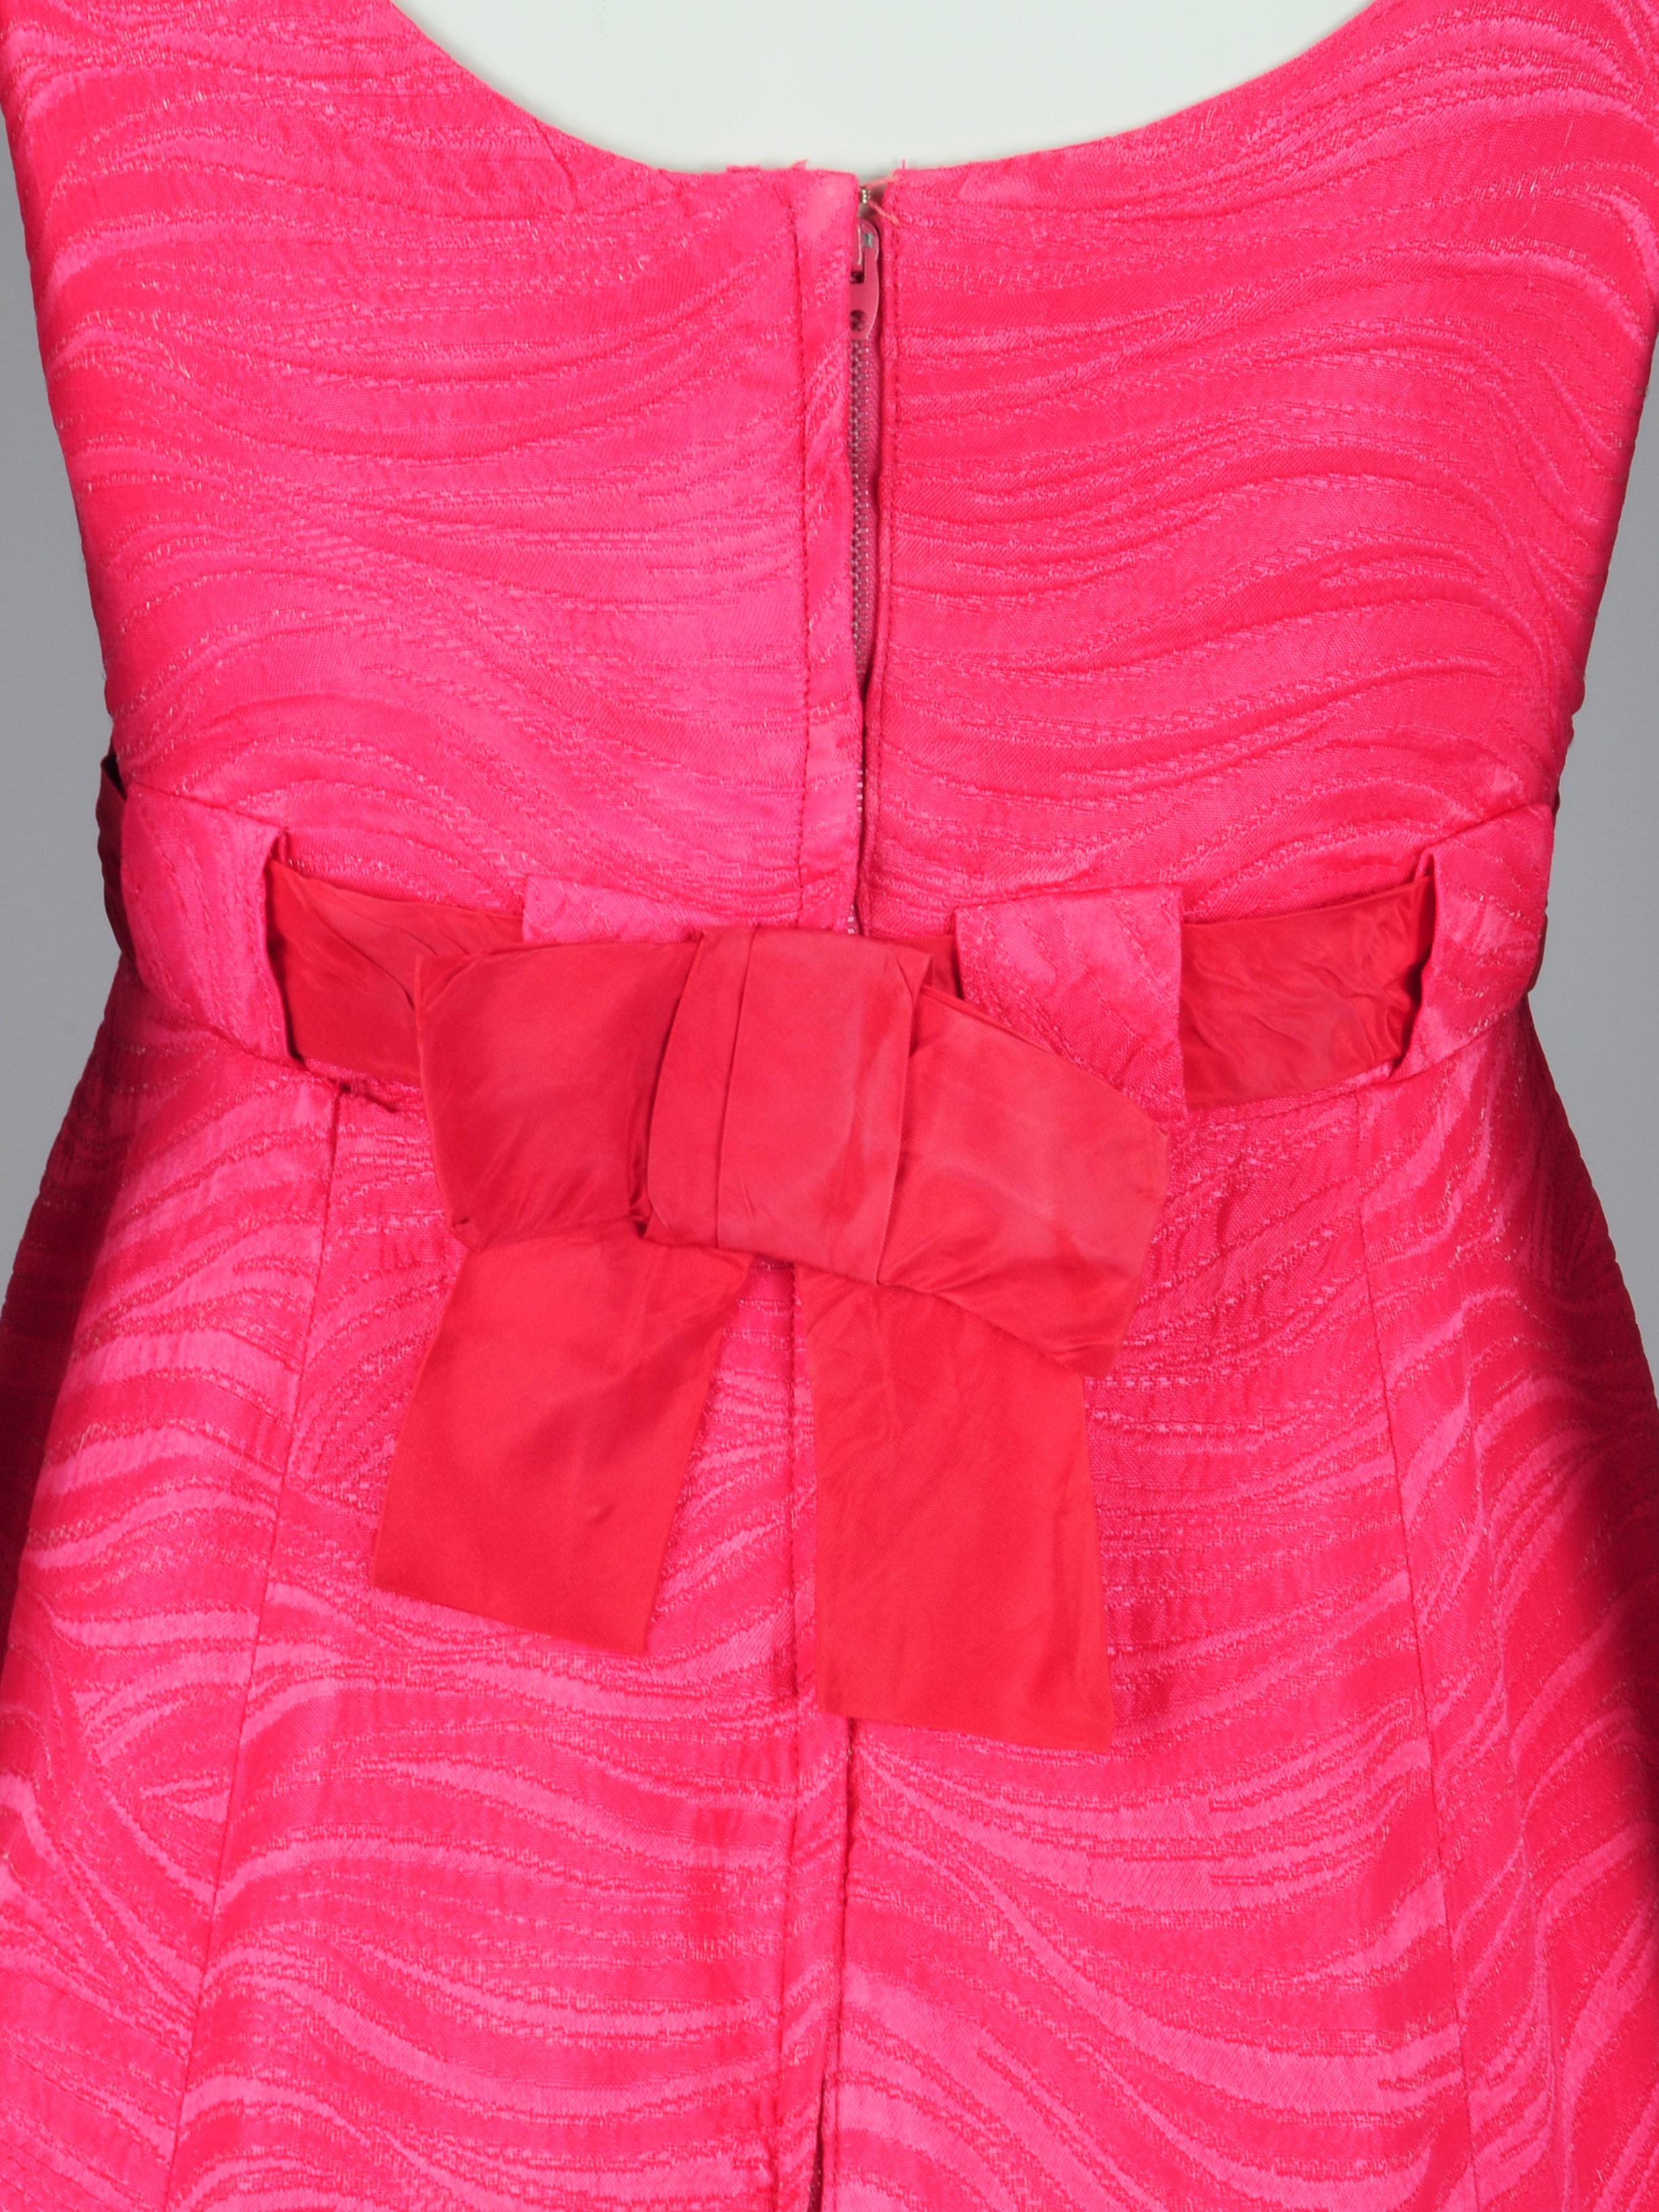 Jean Allen London Dress and Jacket Two Piece Set in Fuchsia Pink with Bow Detail For Sale 5